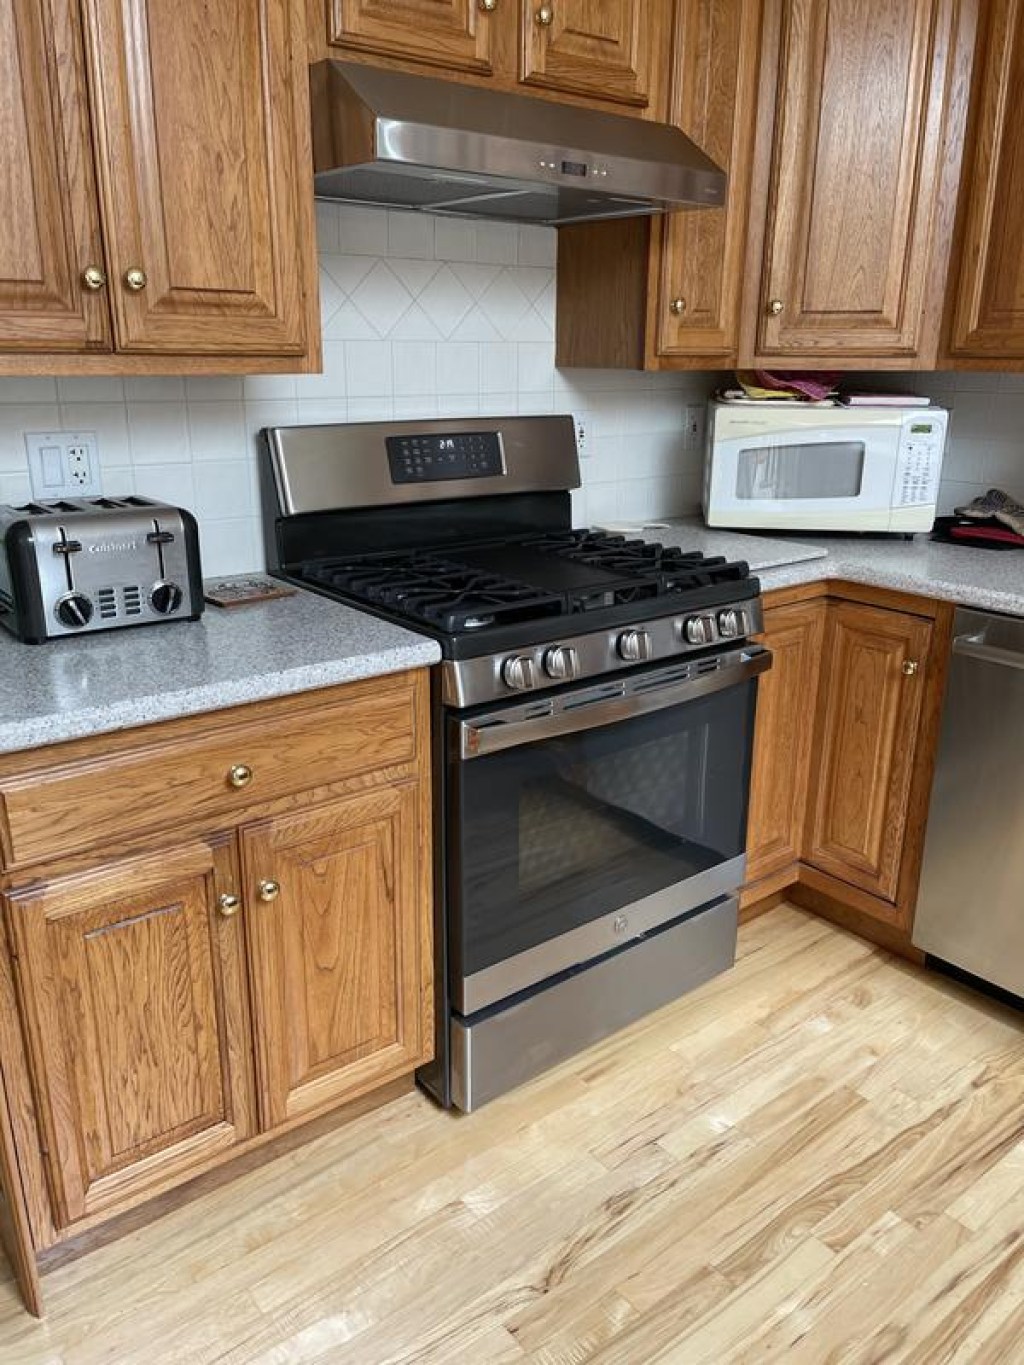 GE stainless steel stove with gas range in brown kitchen